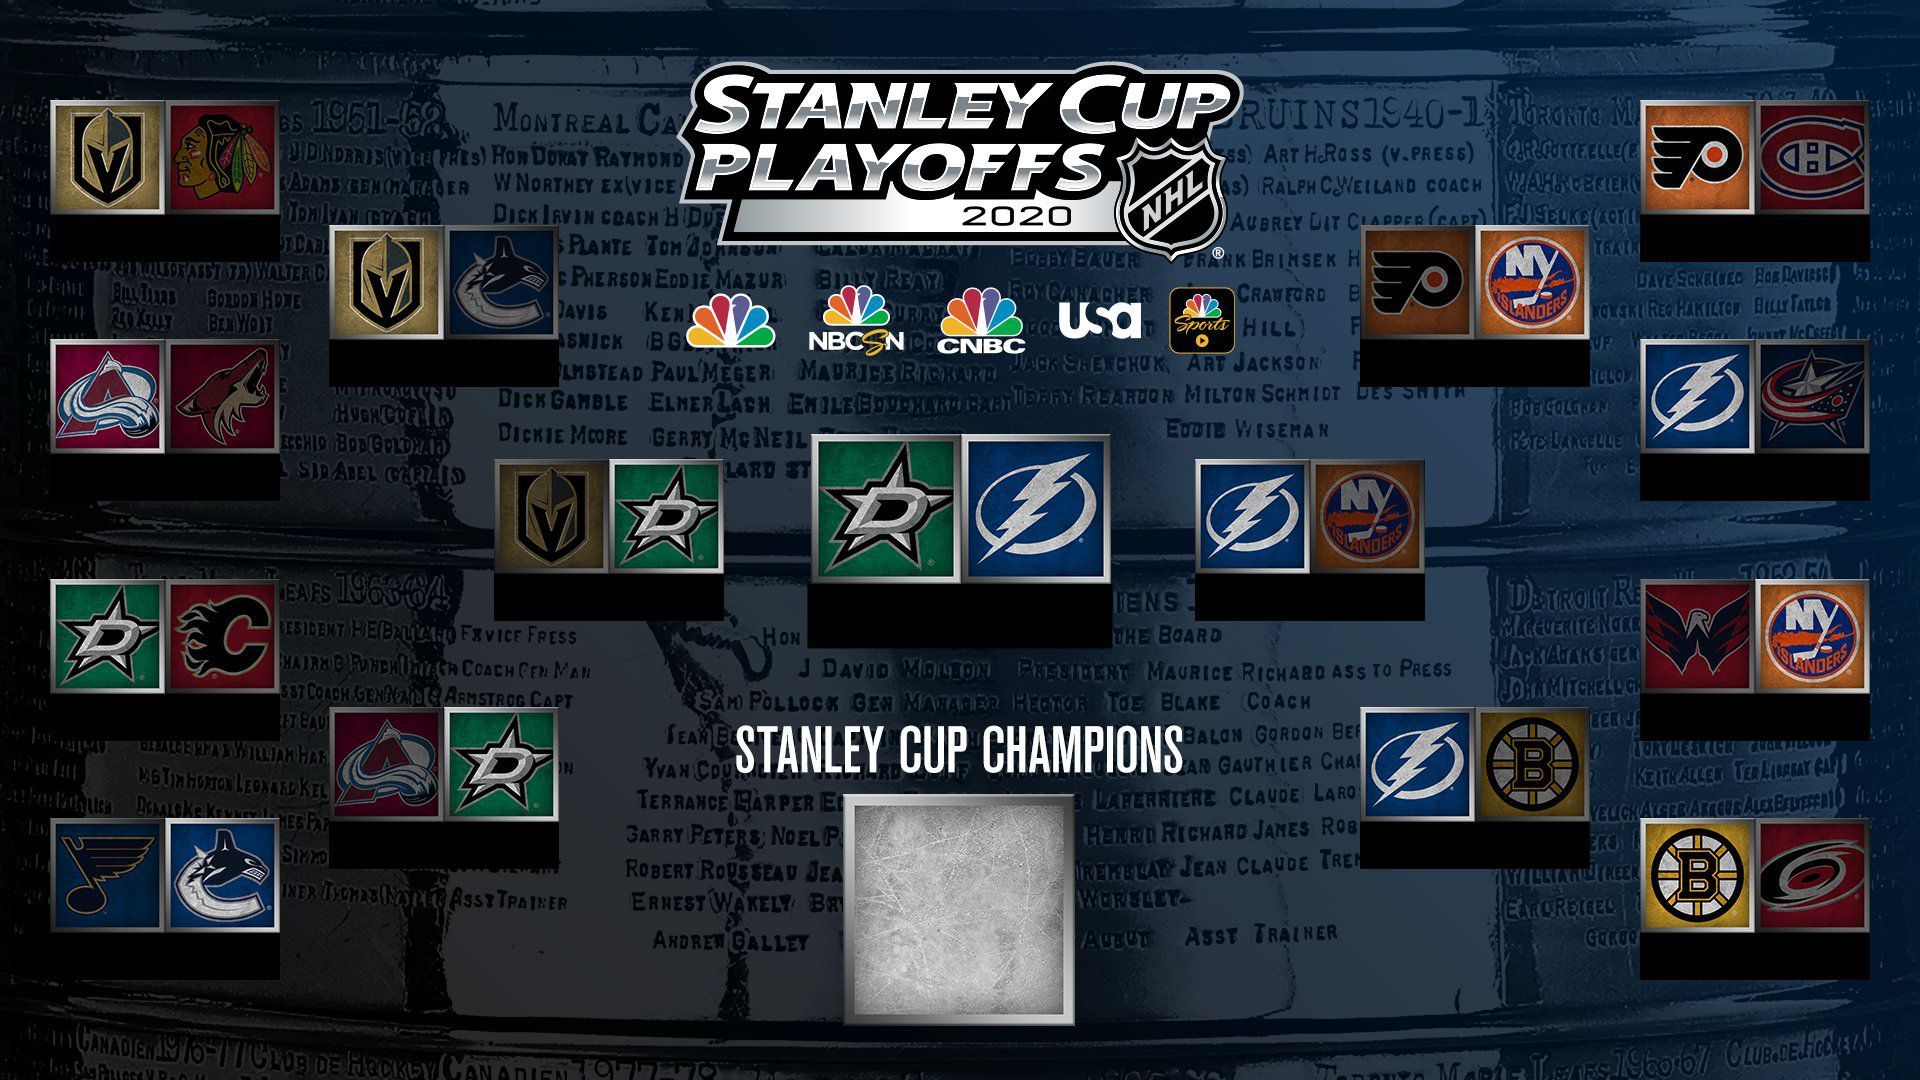 Tampa Bay Lightning Punch Ticket To Stanley Cup Finals Vs Dallas Stars Axios